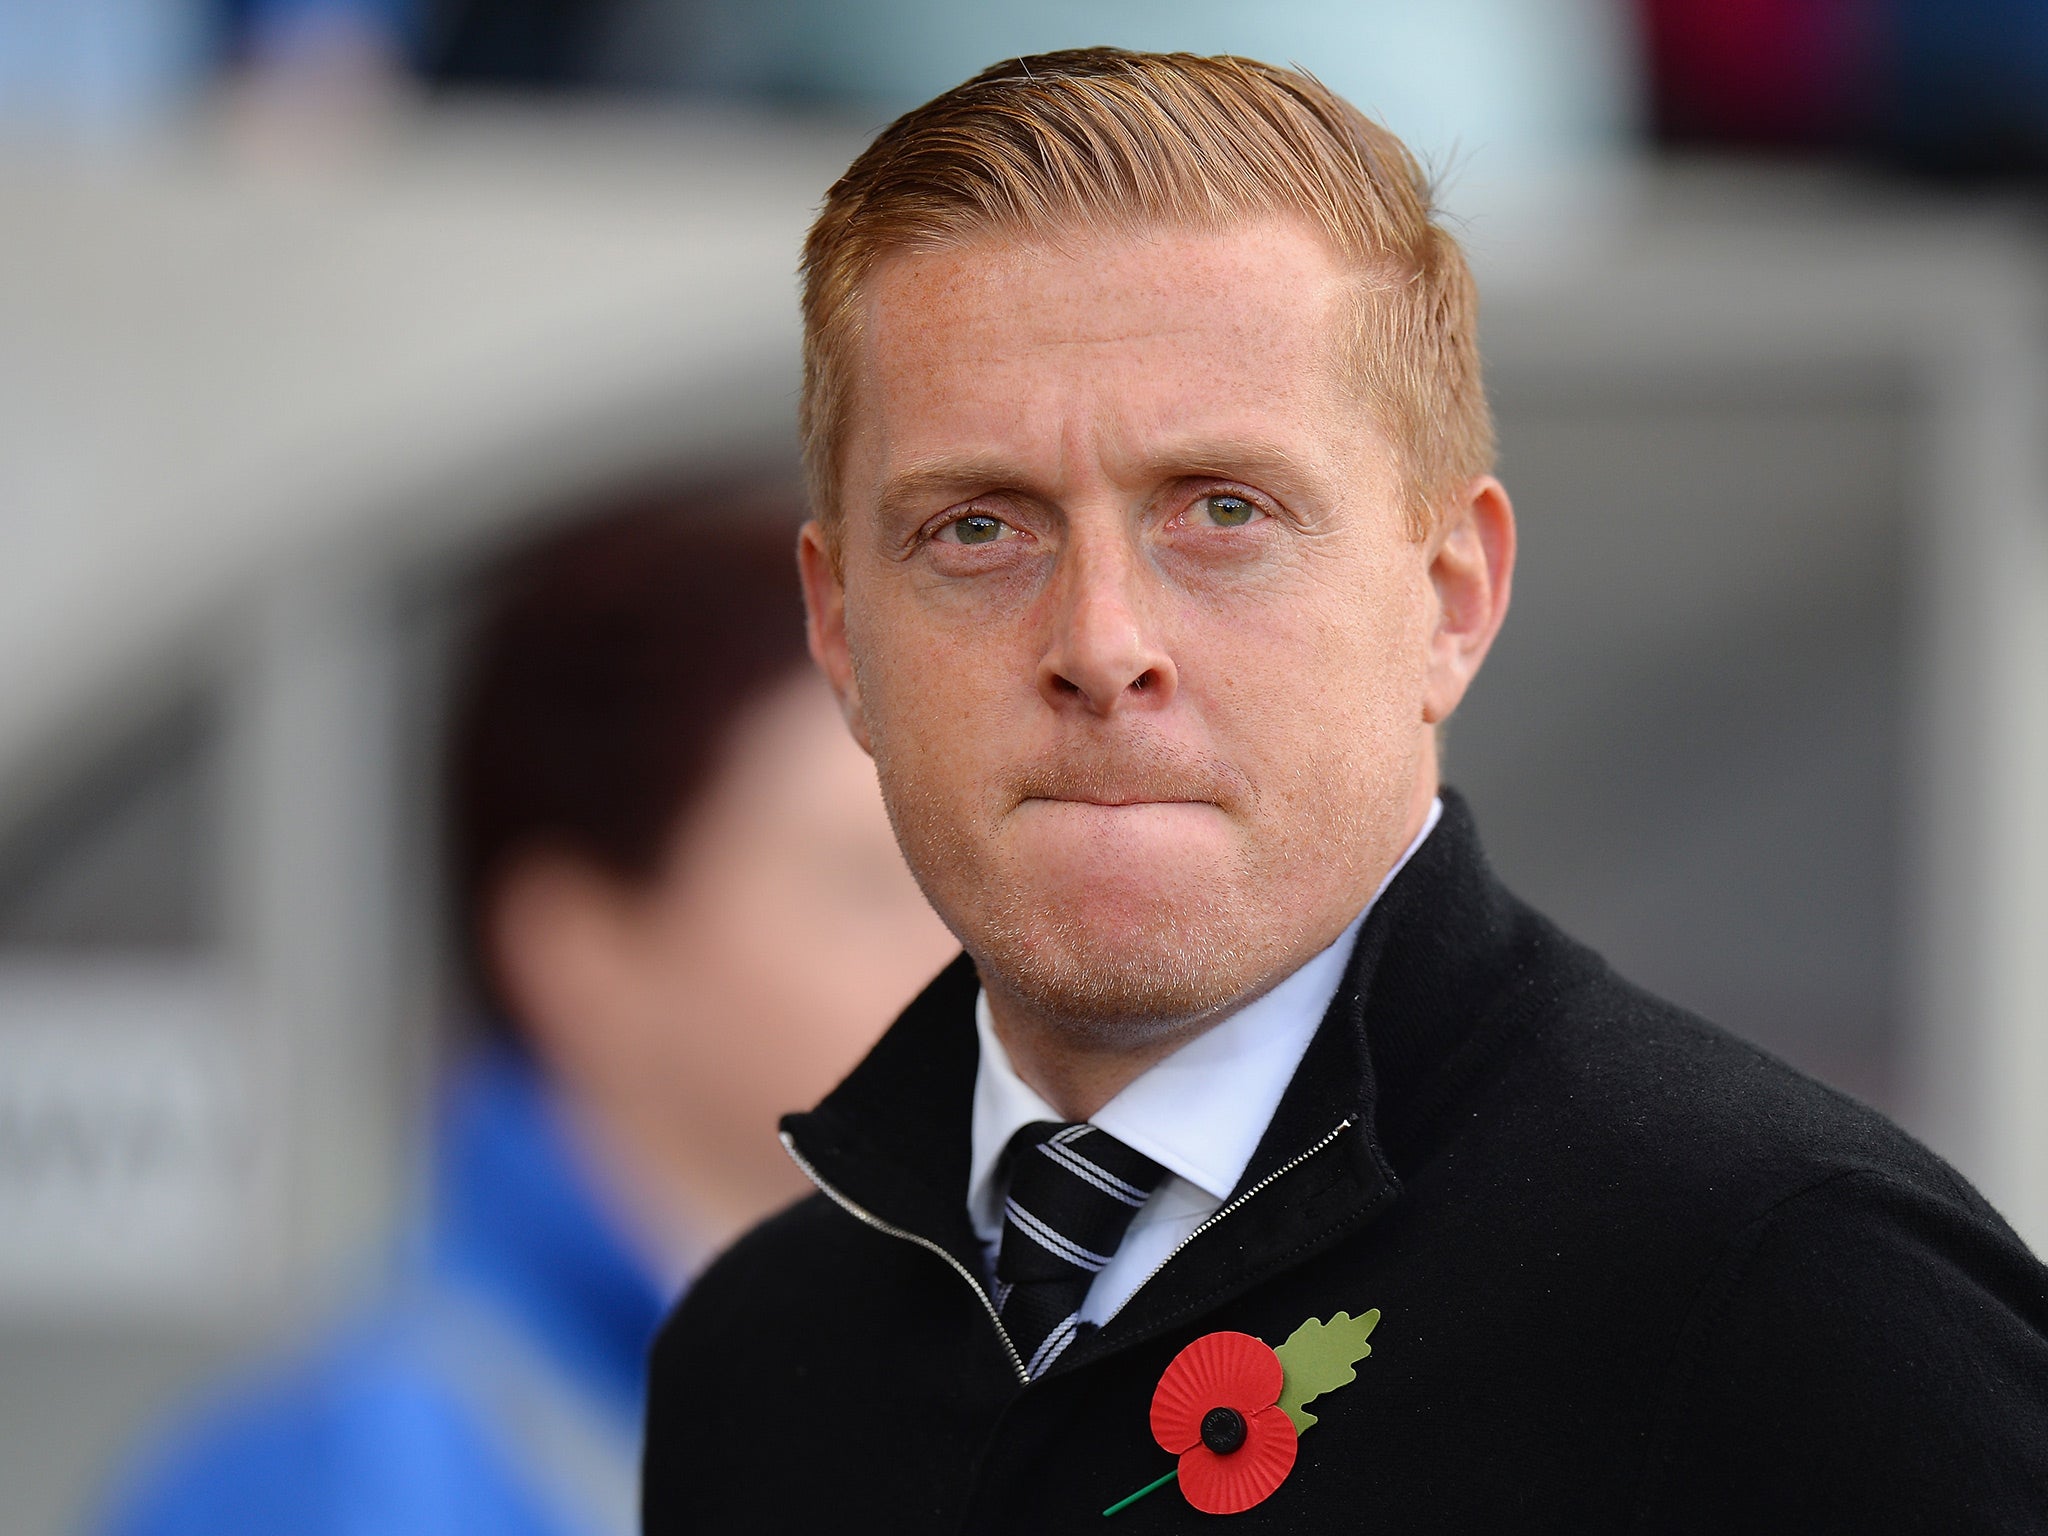 Garry Monk was expected to sign a new deal following the departure of Massimo Cellino